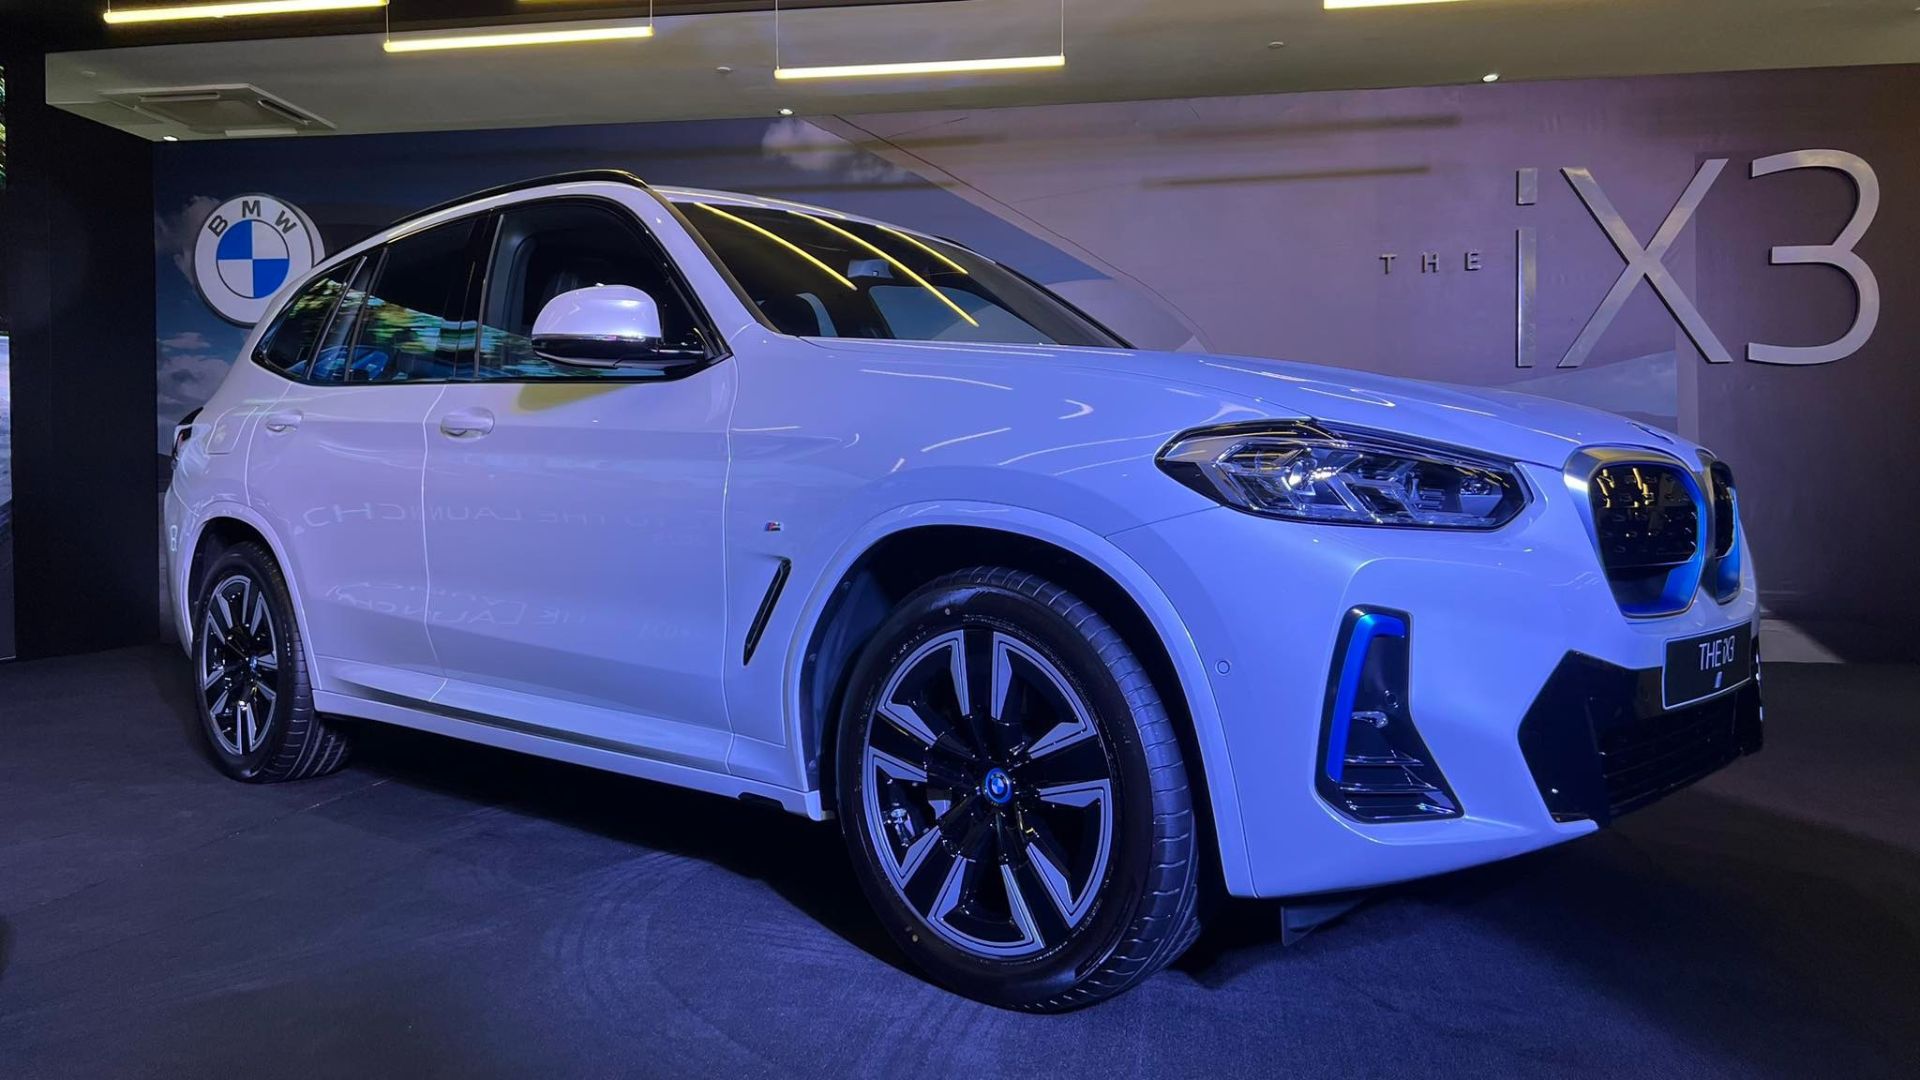 BMW iX3 lands in the Philippines